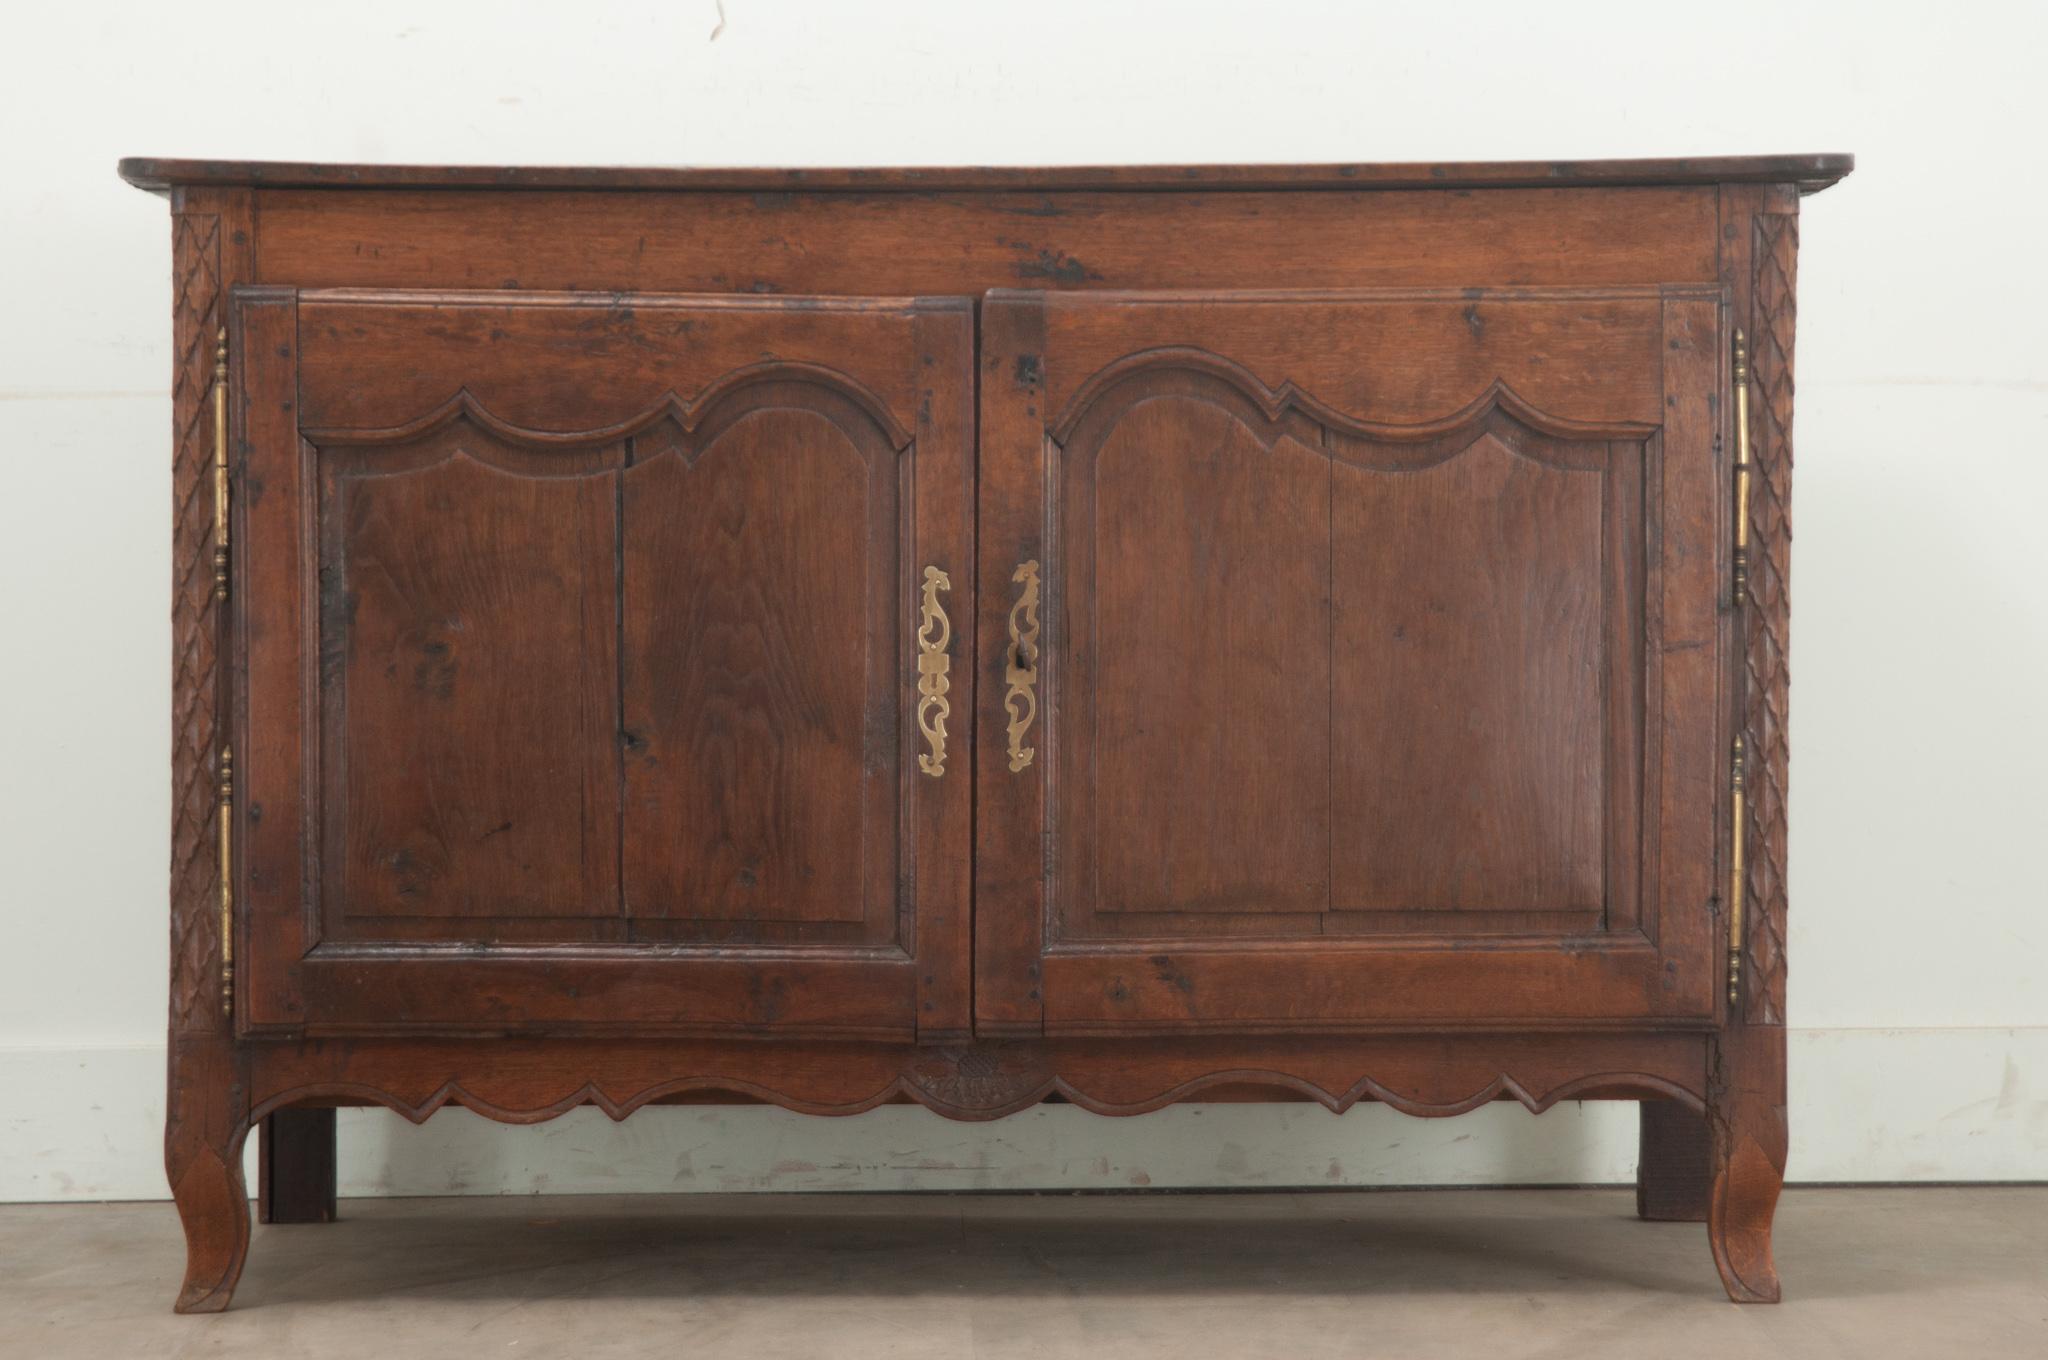 A French Louis XV period solid oak buffet. This buffet has shapely carved doors over a scalloped apron with brass barrel hinges and hand cut escutcheon plates. The doors open with a working lock and key to reveal one fixed shelf at 19 ½” D. Cleaned